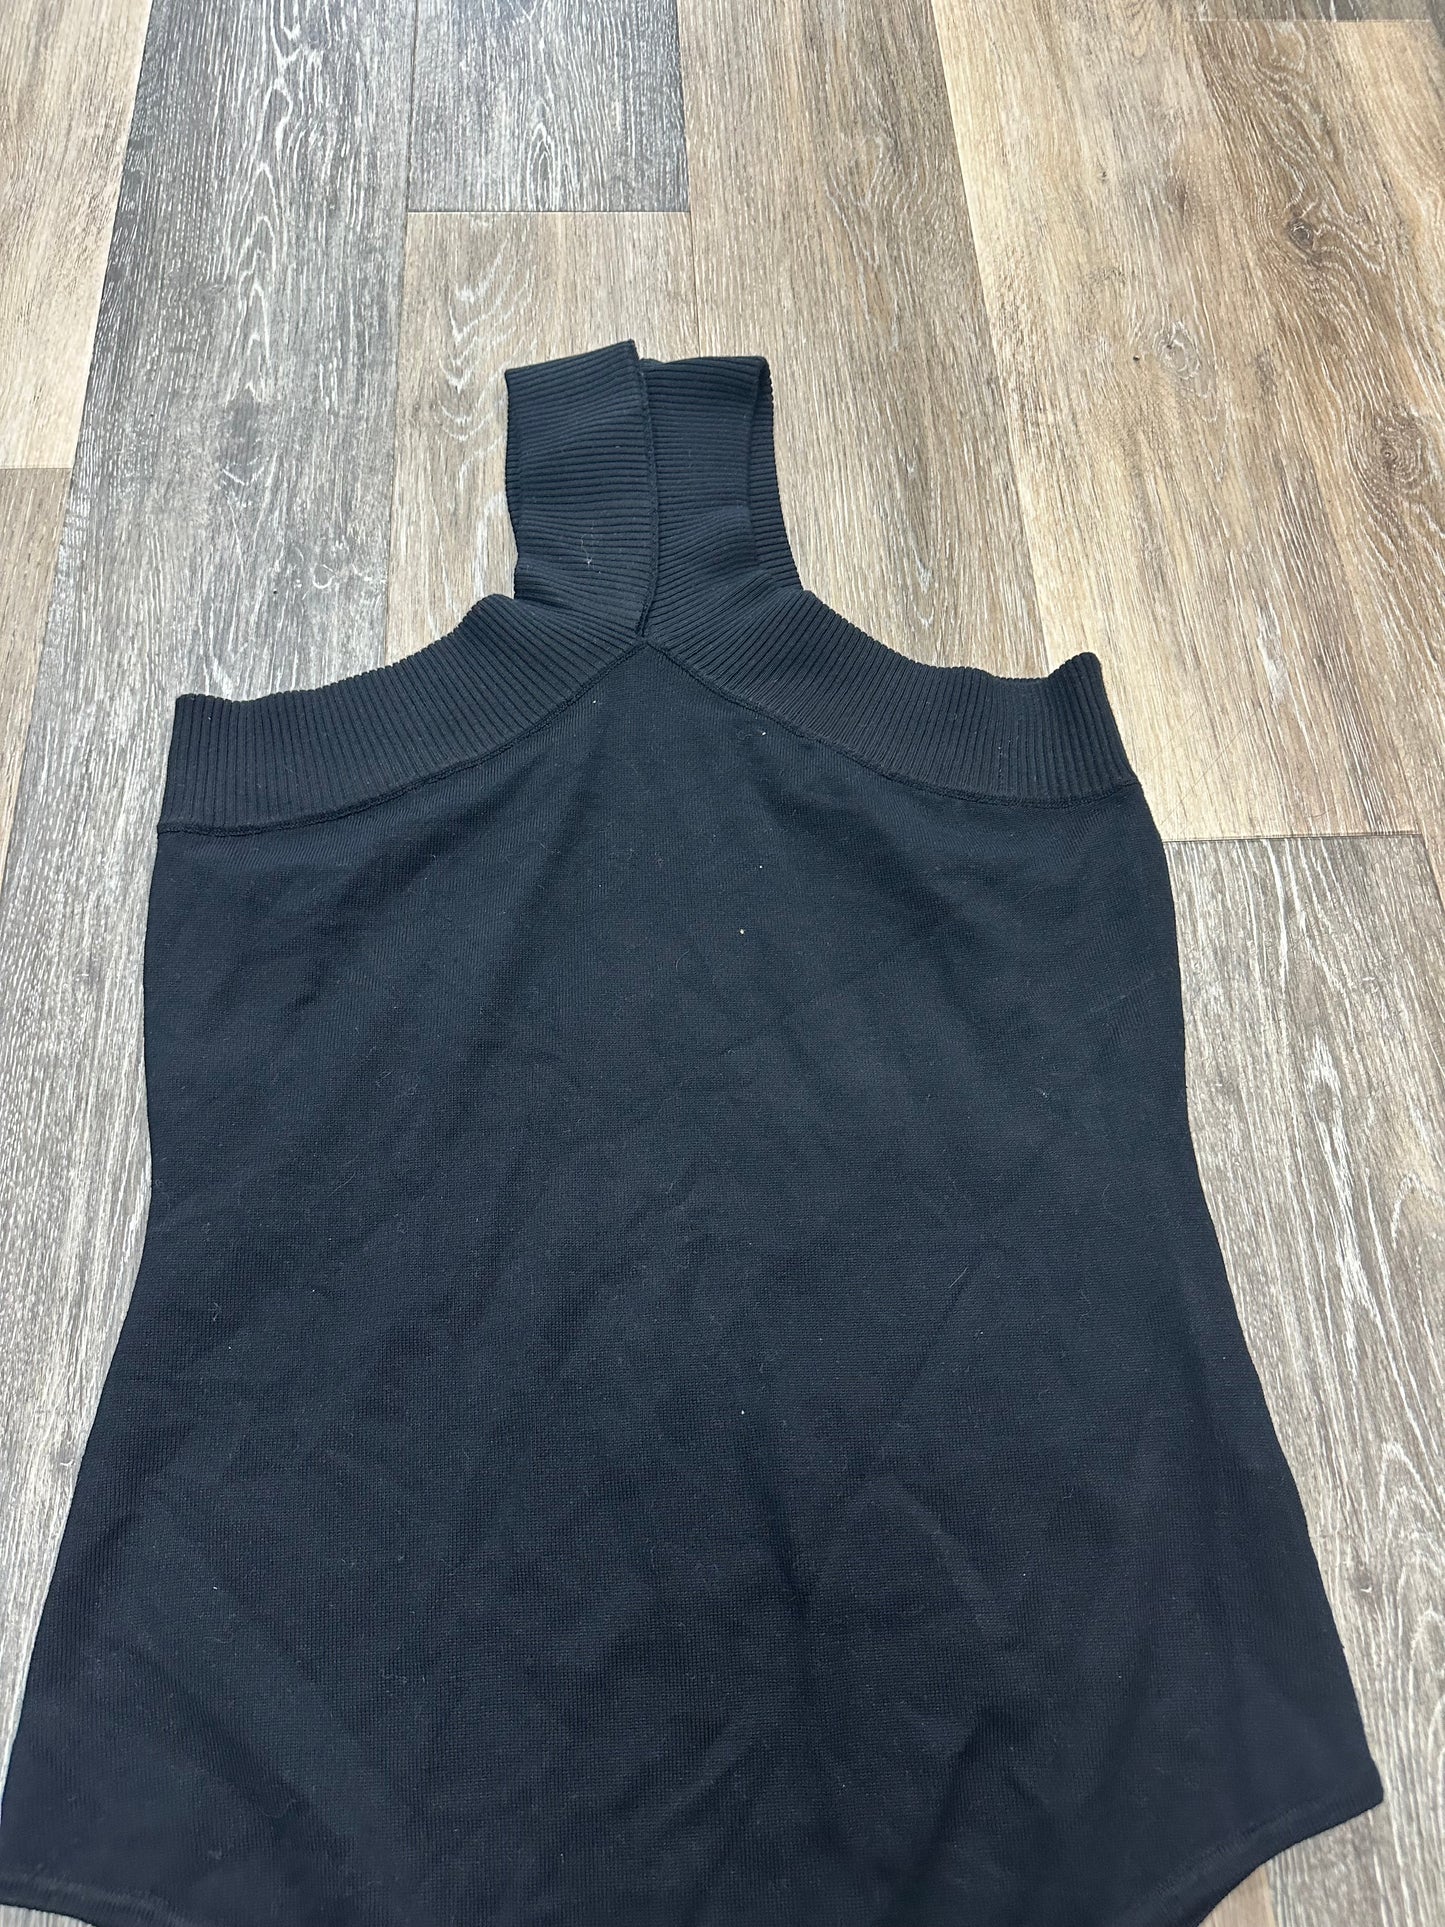 Tank Top By Impressions  Size: 3x